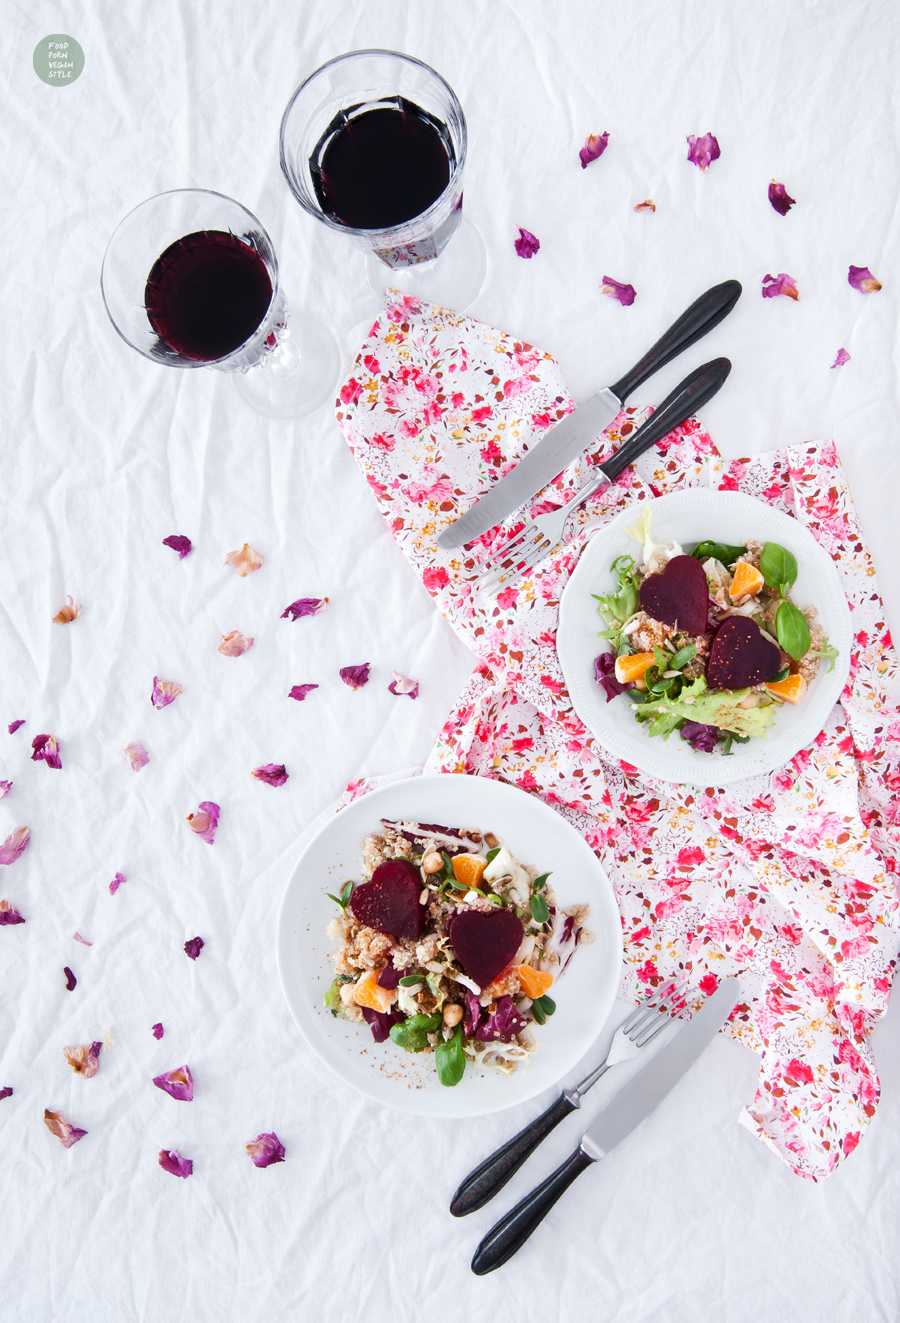 Vegan Valentine's day salad with roasted beetroot hearts, quinoa and a carob-balsamic dressing